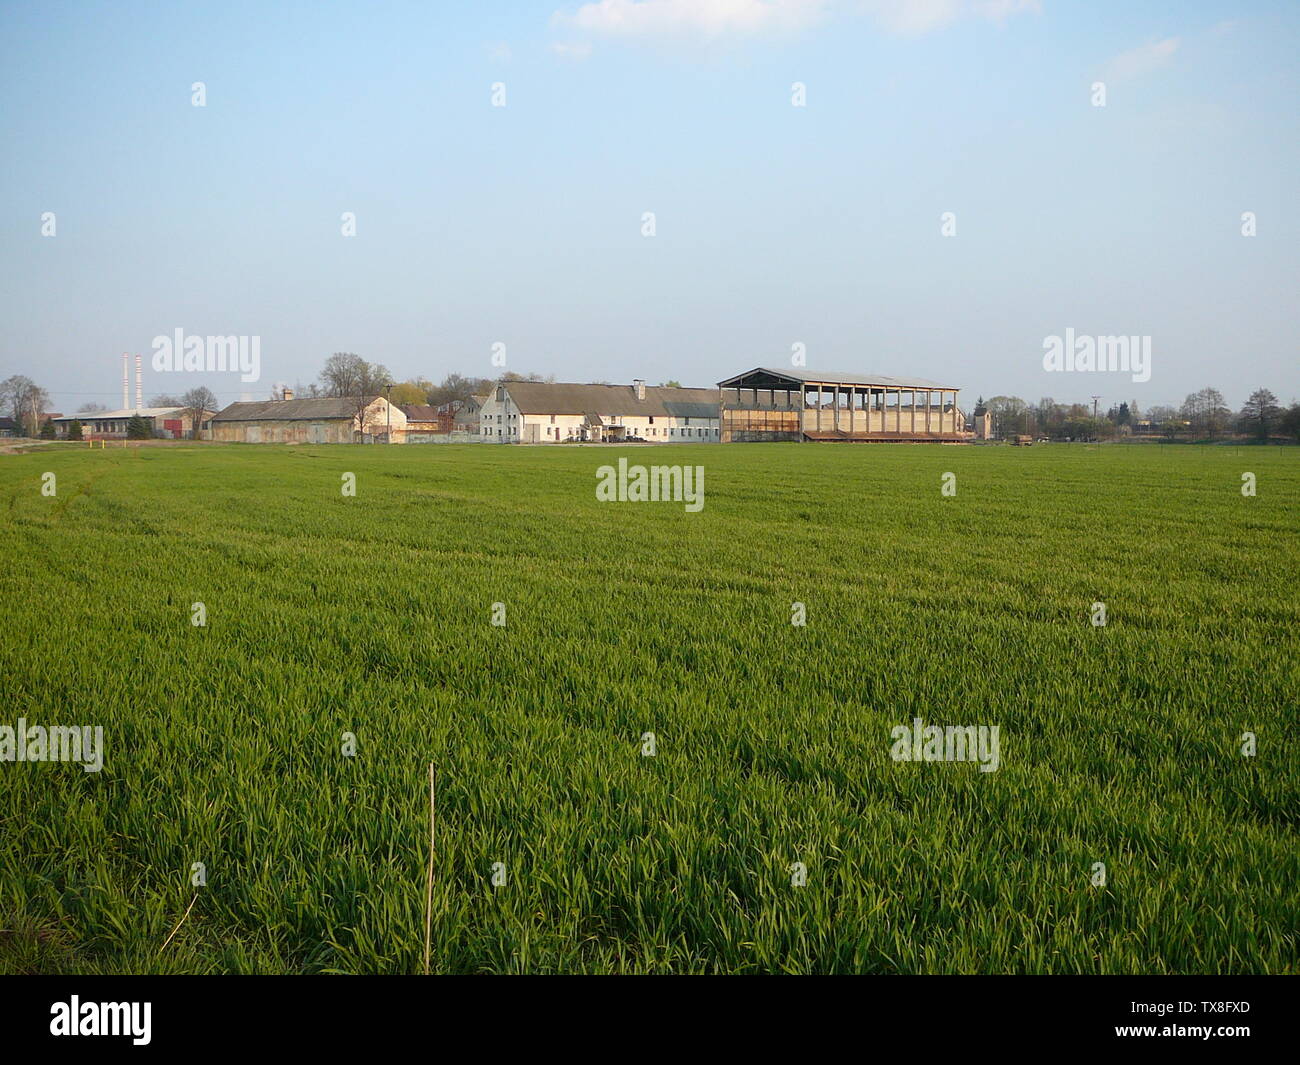 12 16 2007 High Resolution Stock Photography and Images - Alamy